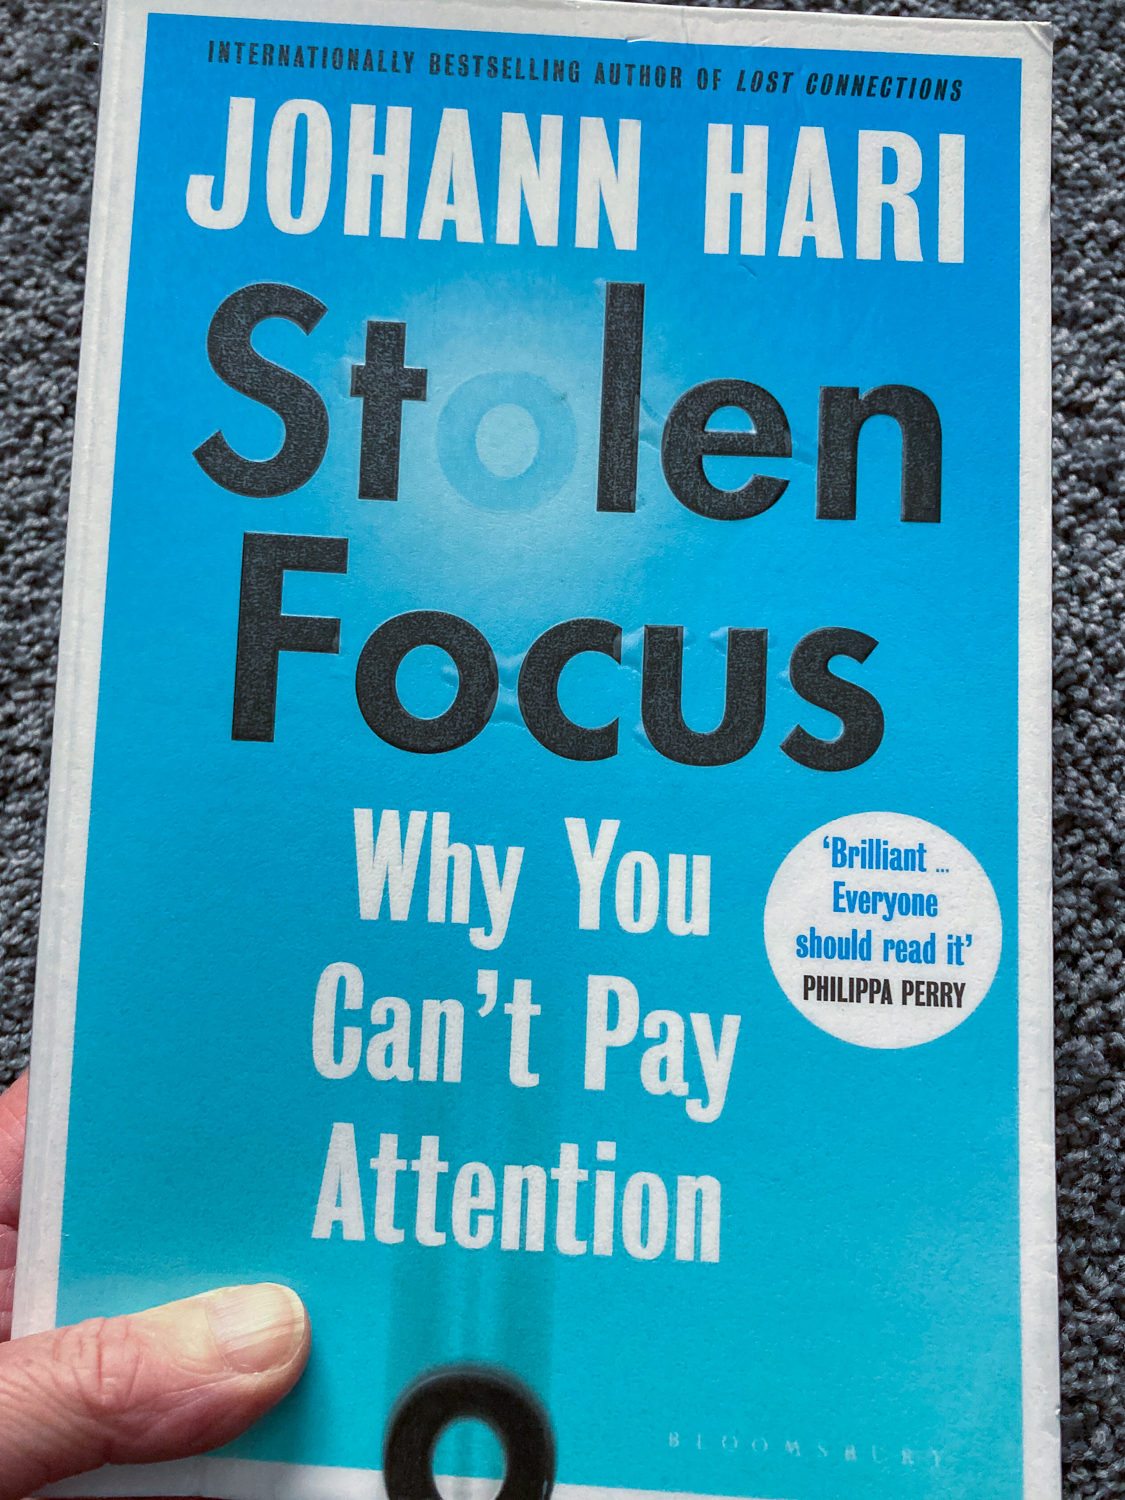 A blue book called Stolen Focus by Johann Hari: Why you can't pay attention